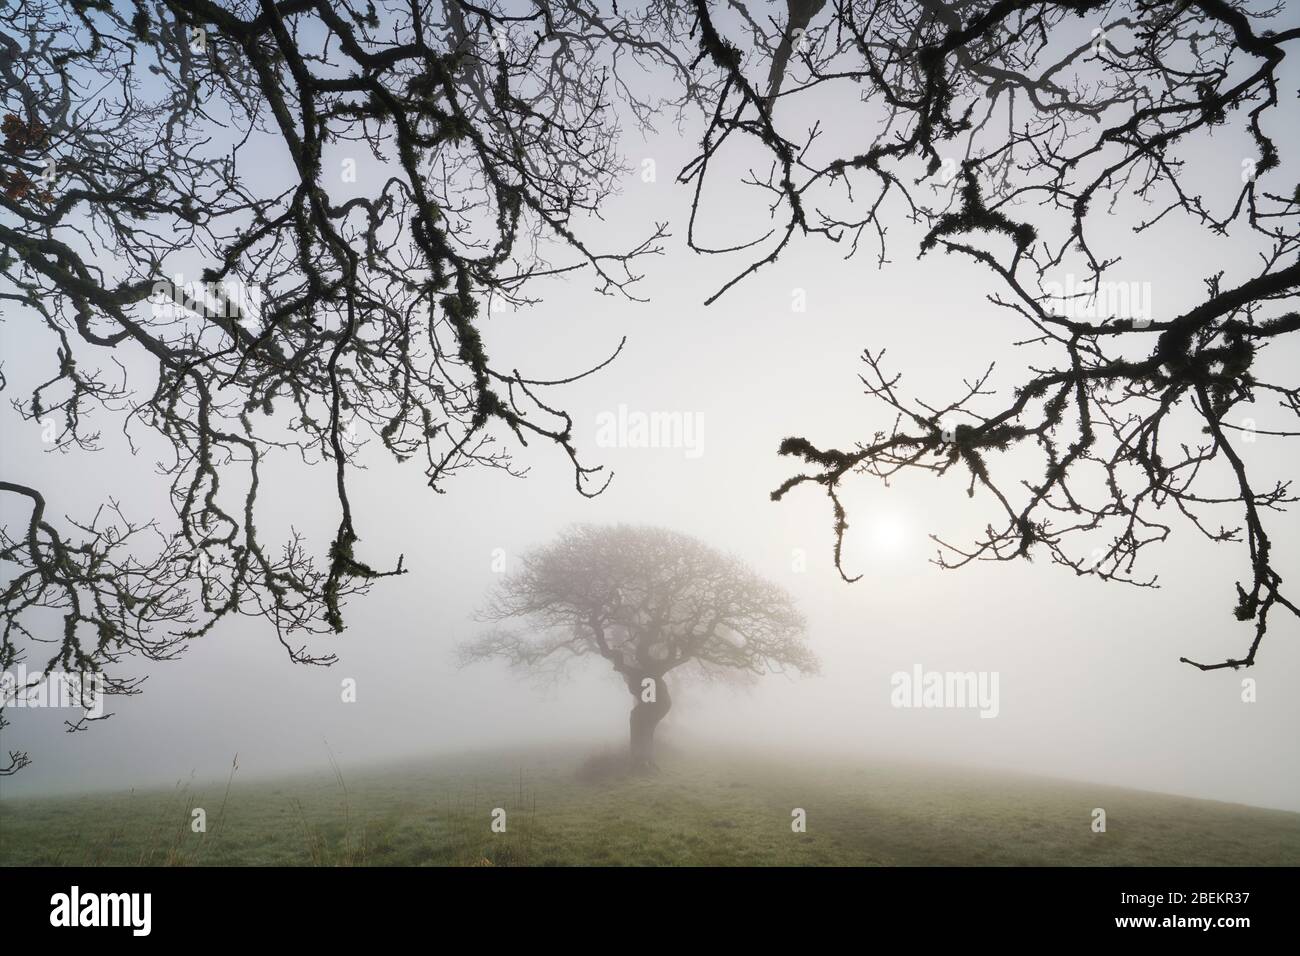 Oak branches framing distant trees shrouded in mist with the early sun breaking through Stock Photo